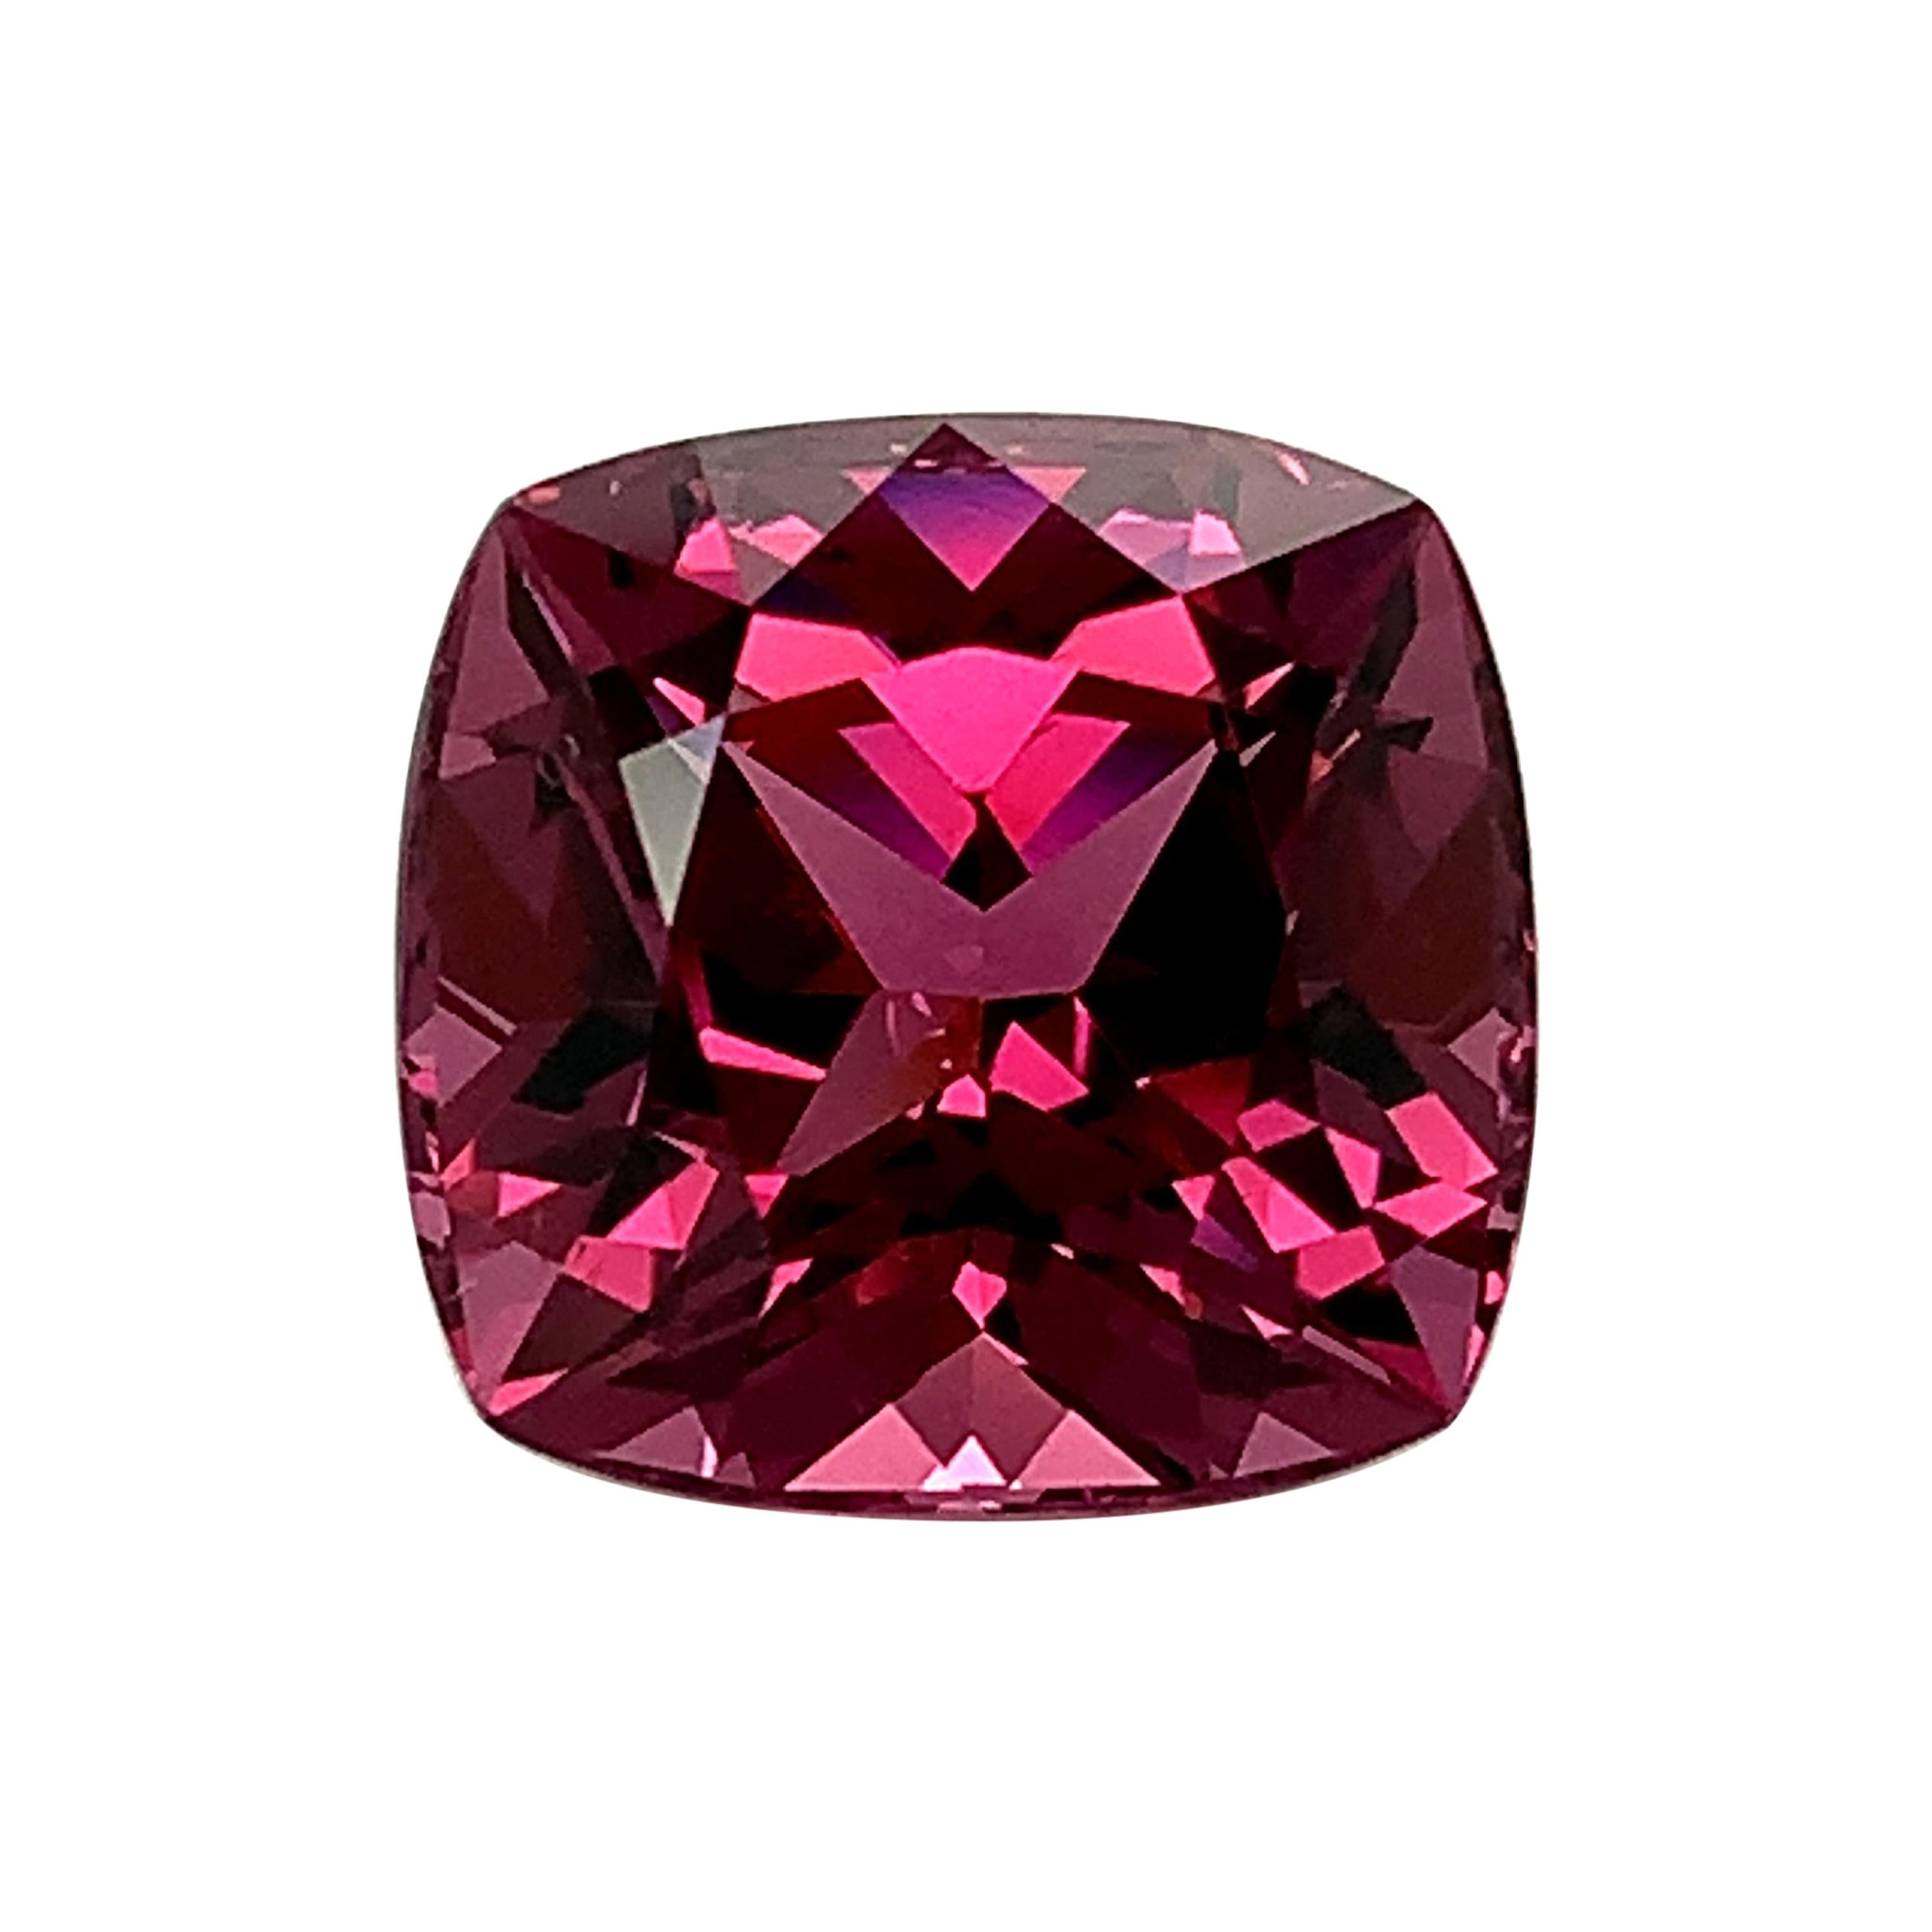 Unheated 4.71 Carat Pink Spinel, Loose Gemstone, GIA Certified For Sale ...